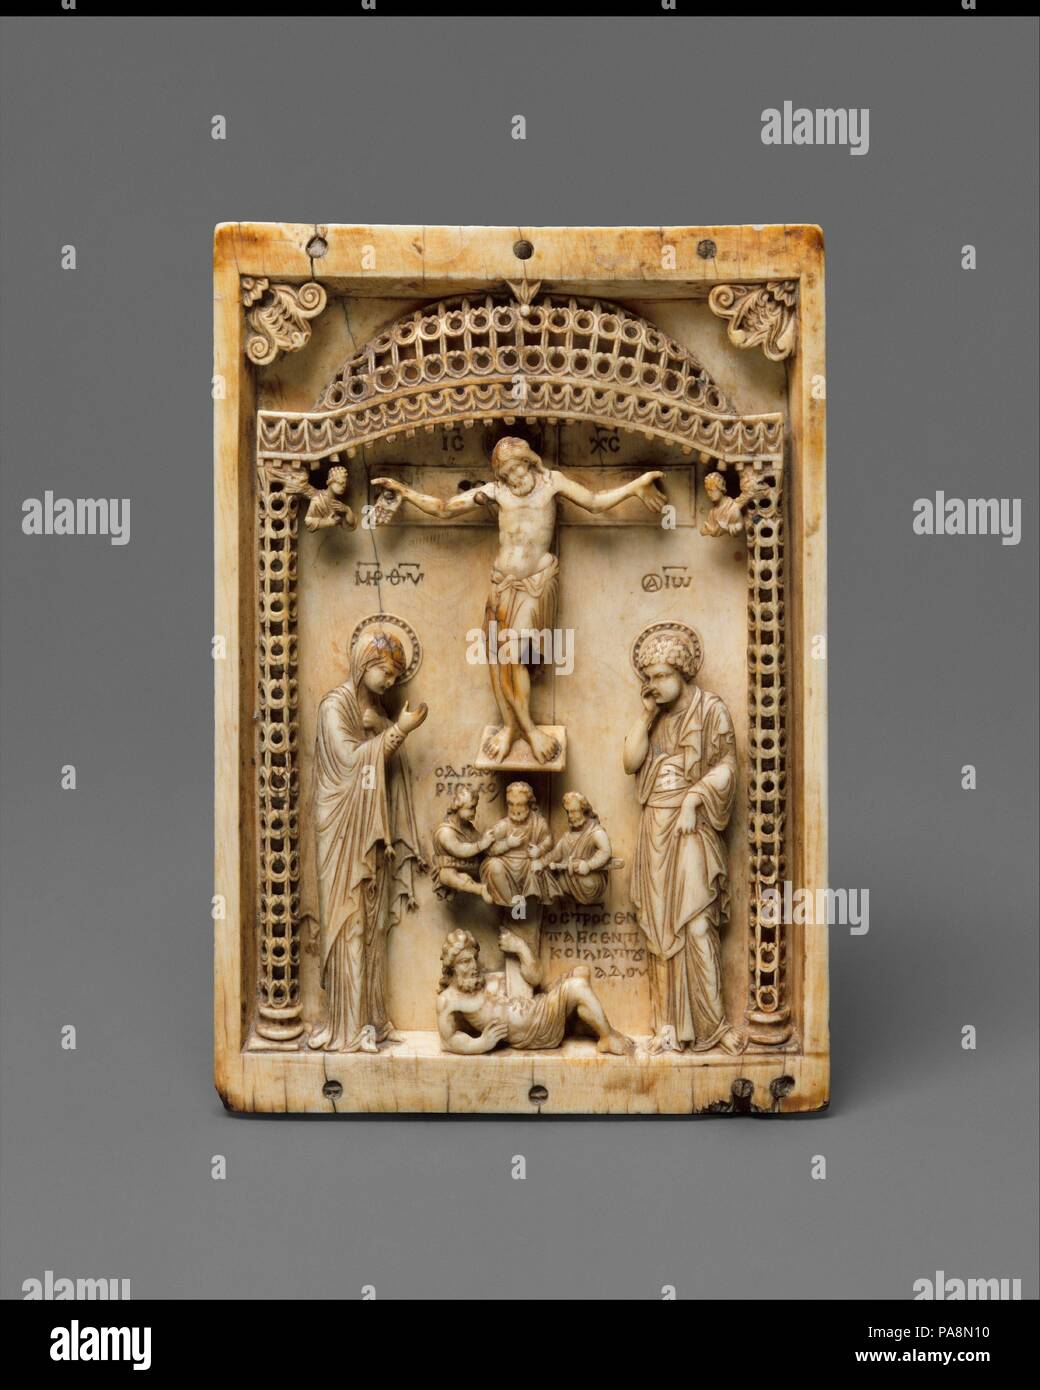 Icon with the Crucifixion. Culture: Byzantine. Dimensions: 5 15/16 × 3 1/2 × 5/16 in. (15.1 × 8.9 × 0.8 cm). Date: mid-10th century.  This Byzantine depiction of the Crucifixion emphasizes Christ's victory over death.  Christ's body is shown limply attached to the cross, his arms bent at the elbows and his legs turned, pushing his hip slightly outward.  His head falls forward against his left shoulder.  The Virgin and Saint John the Baptist mourn his passing, and underneath the foot support, the three soldiers divide Christ's seamless garment.  These figures are frequently portrayed as witness Stock Photo